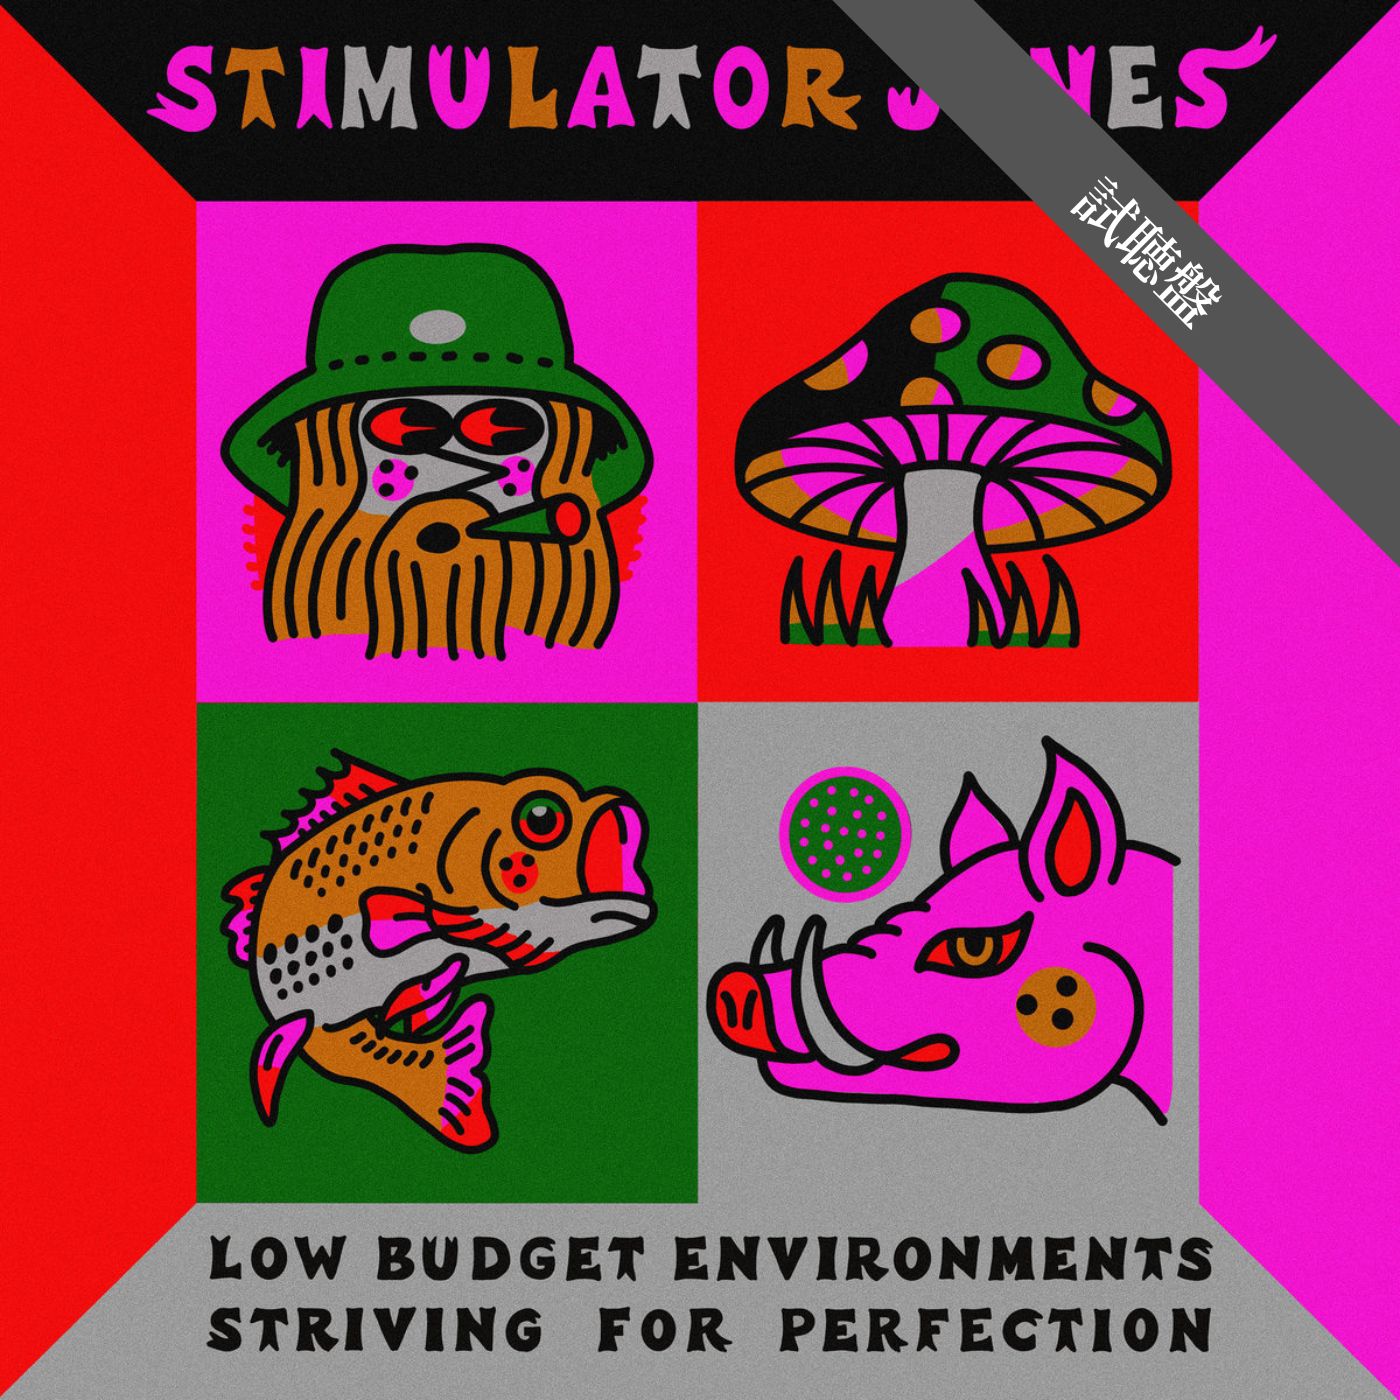 Stimulator Jones /  Low Budget Environments Striving For Perfection